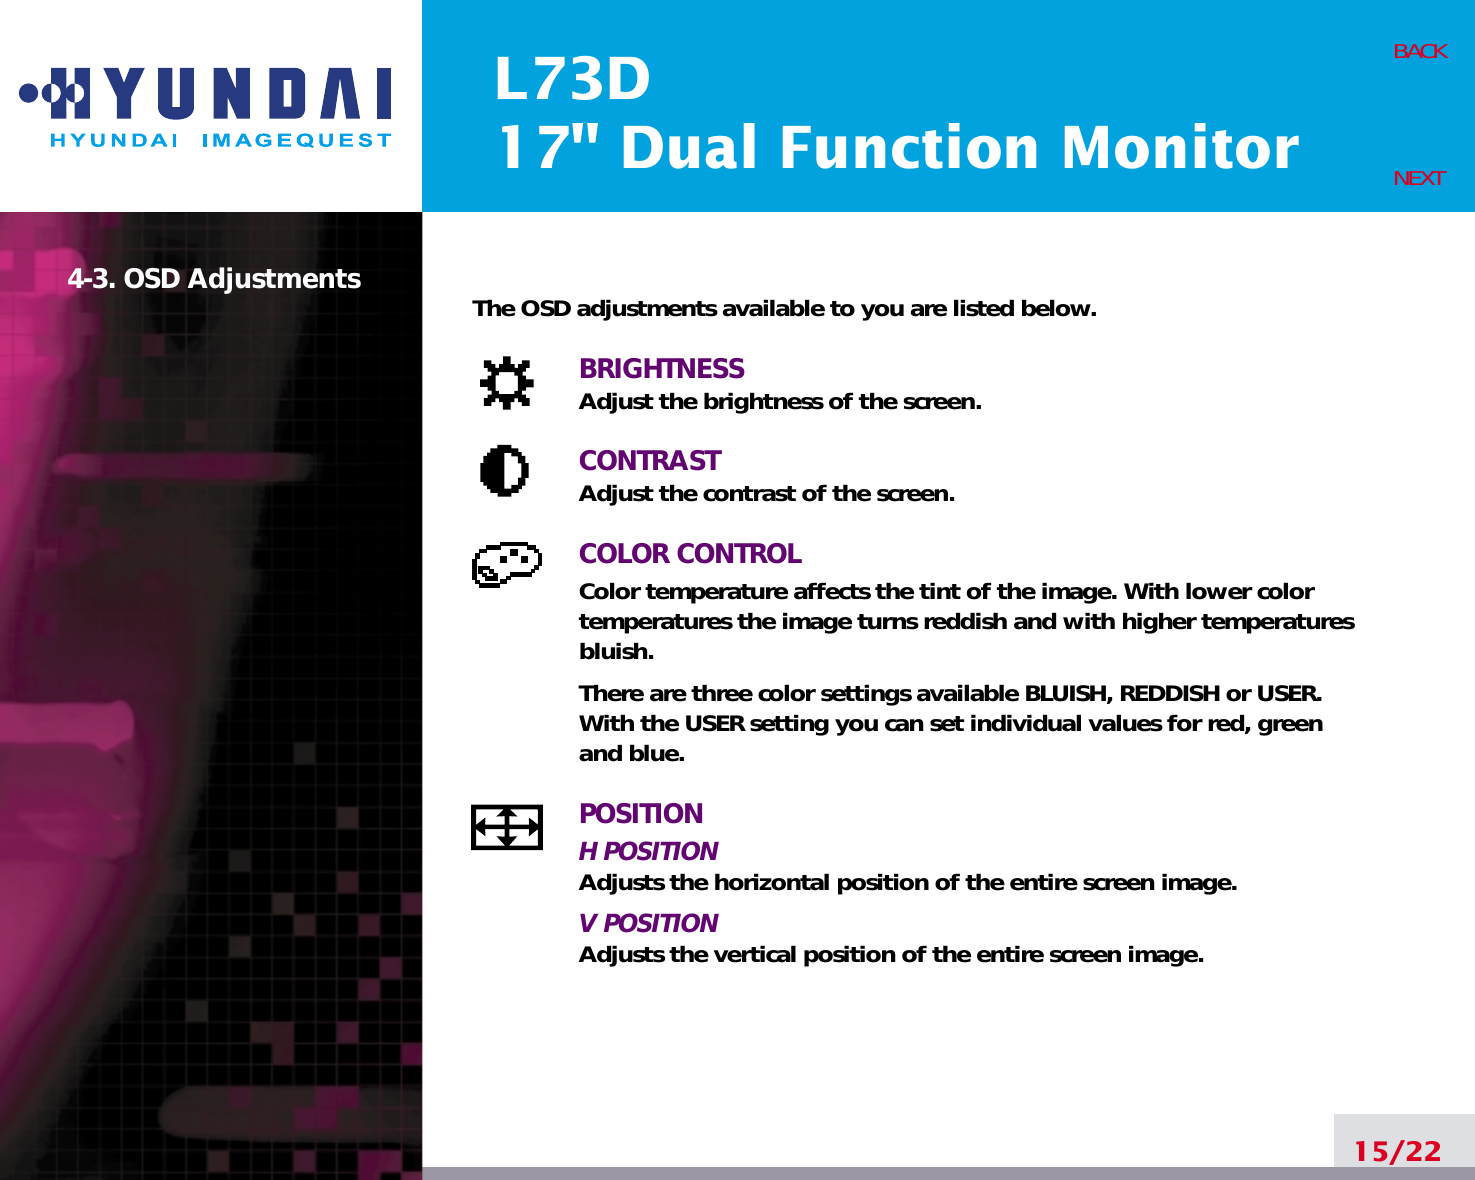 L73D17&quot; Dual Function Monitor15/22BACKNEXT4-3. OSD Adjustments The OSD adjustments available to you are listed below.BRIGHTNESSAdjust the brightness of the screen.CONTRASTAdjust the contrast of the screen.COLOR CONTROLColor temperature affects the tint of the image. With lower colortemperatures the image turns reddish and with higher temperaturesbluish.There are three color settings available BLUISH, REDDISH or USER. With the USER setting you can set individual values for red, greenand blue.POSITIONH POSITIONAdjusts the horizontal position of the entire screen image.V POSITIONAdjusts the vertical position of the entire screen image.